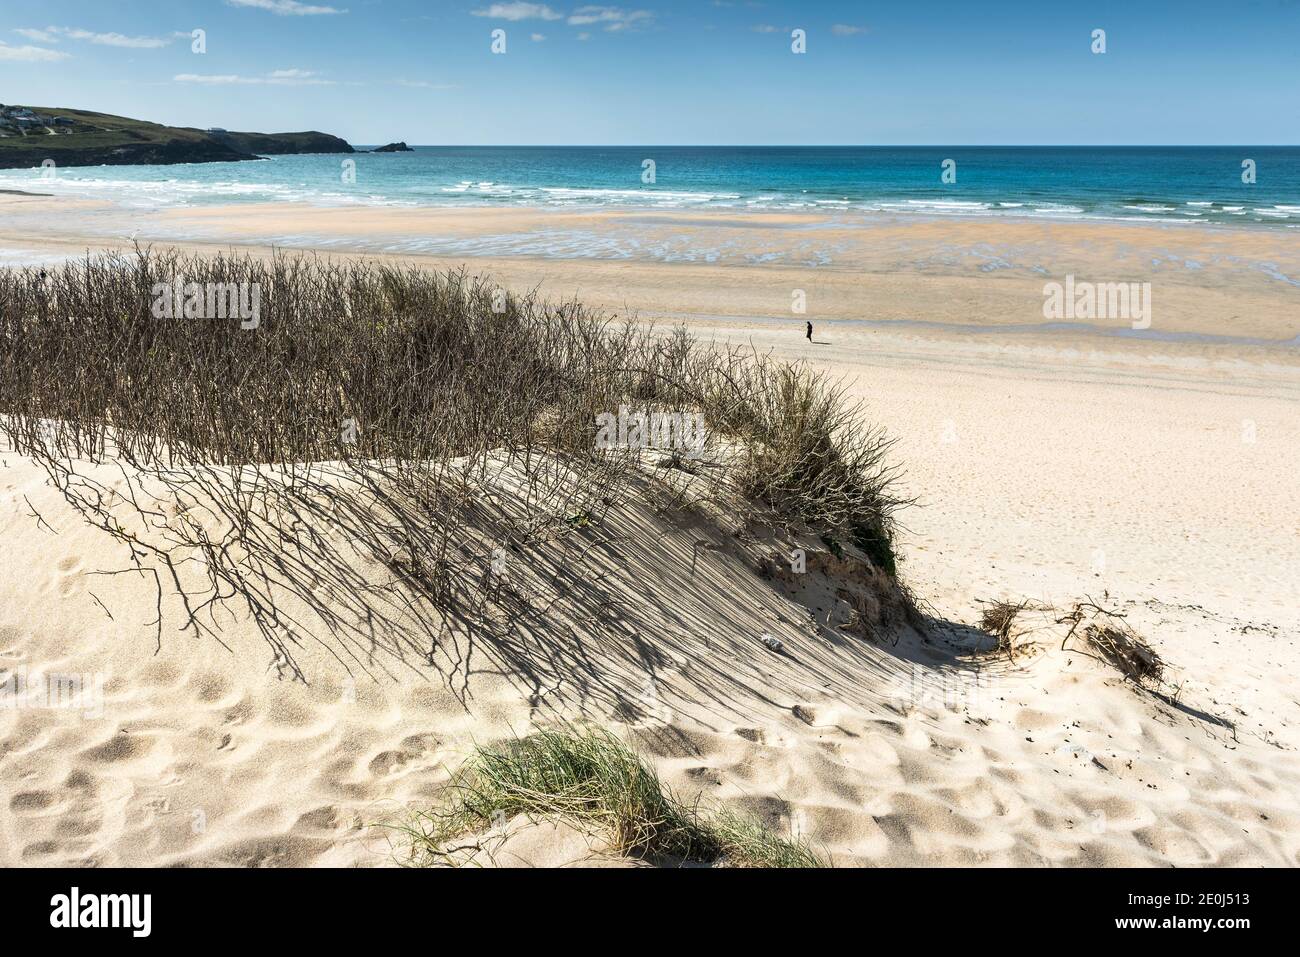 Vegetation growing on the sand dune system overlooking a Fistral Beach in Newquay in Cornwall. Stock Photo